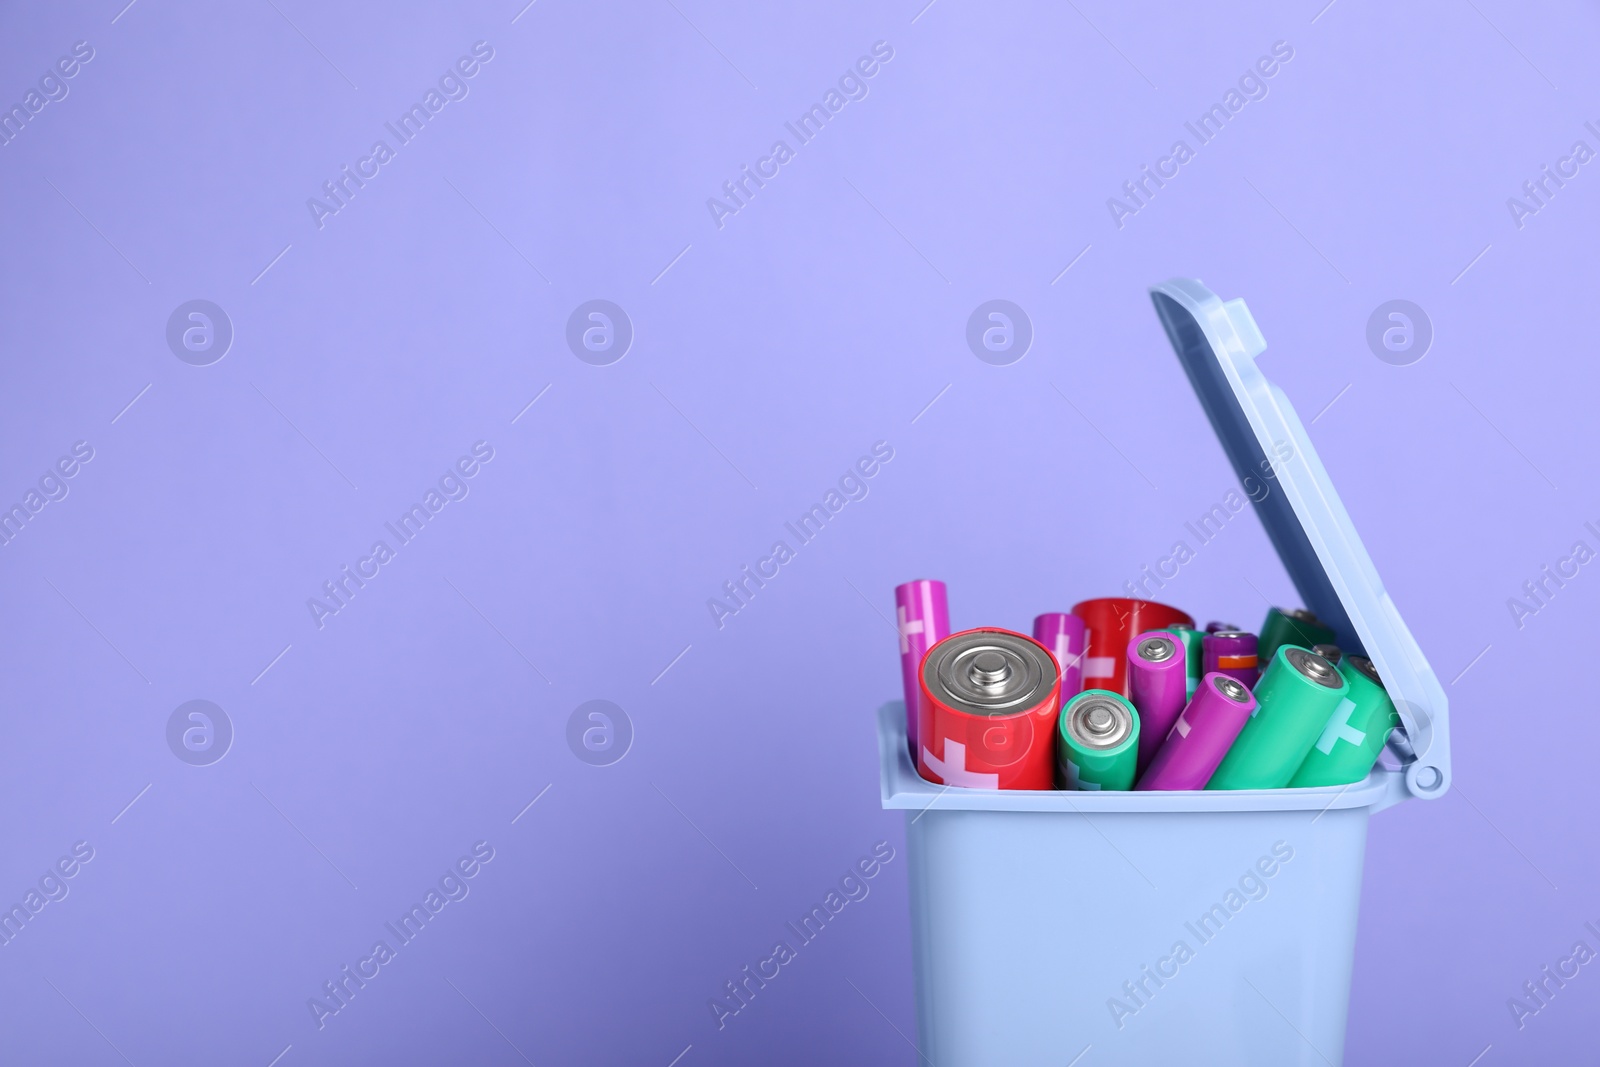 Photo of Many used batteries in recycling bin on light purple background. Space for text